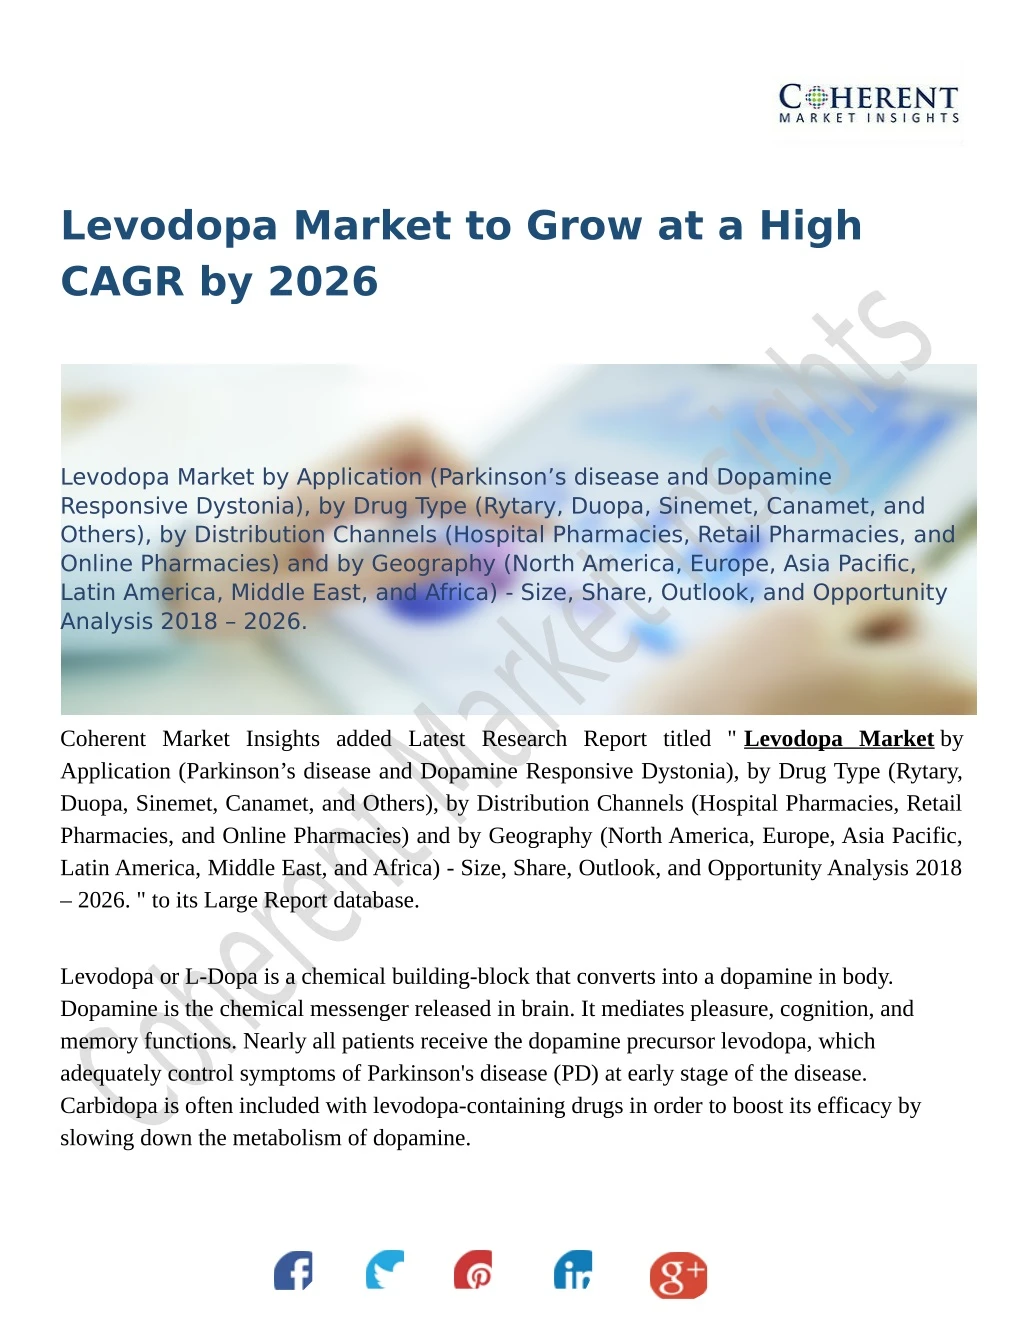 levodopa market to grow at a high cagr by 2026